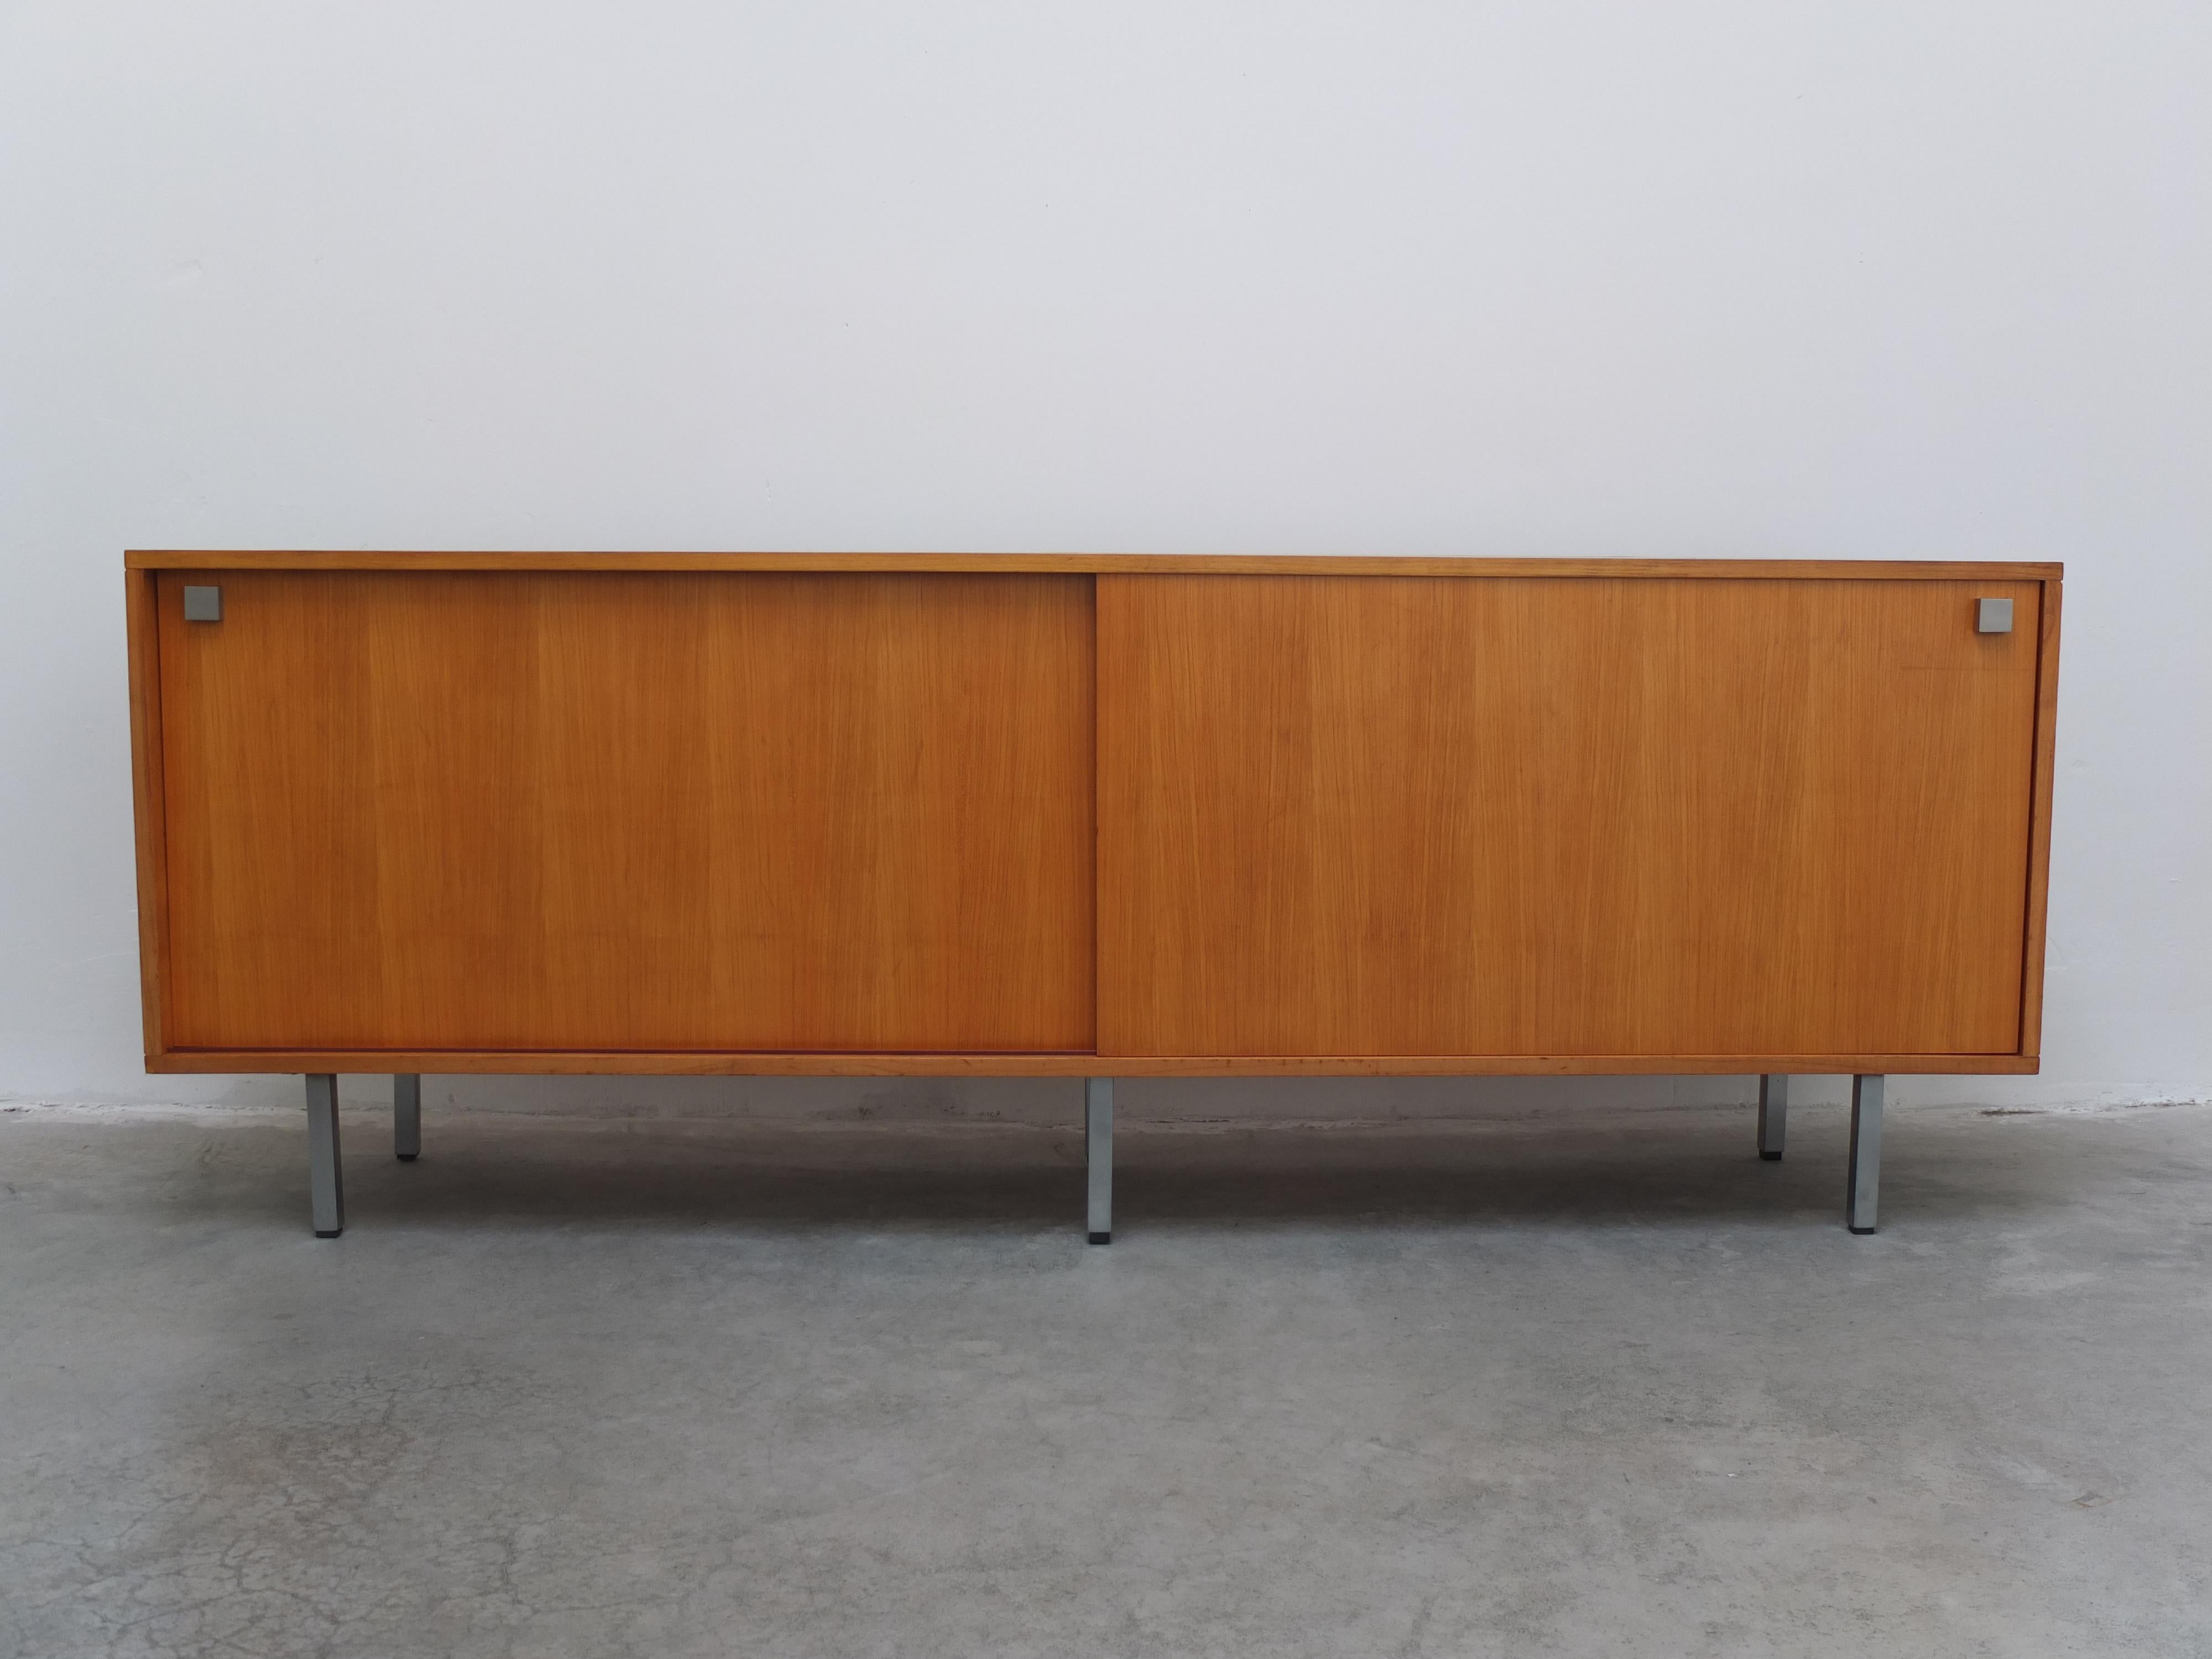 A great large sideboard designed by Belgian modernist designer Alfred Hendrickx for Belform, 1960s. This model comes in a rare honey-colored wood veneer which is rarely seen. Normally these sideboards are made in rosewood or teak. This wood color